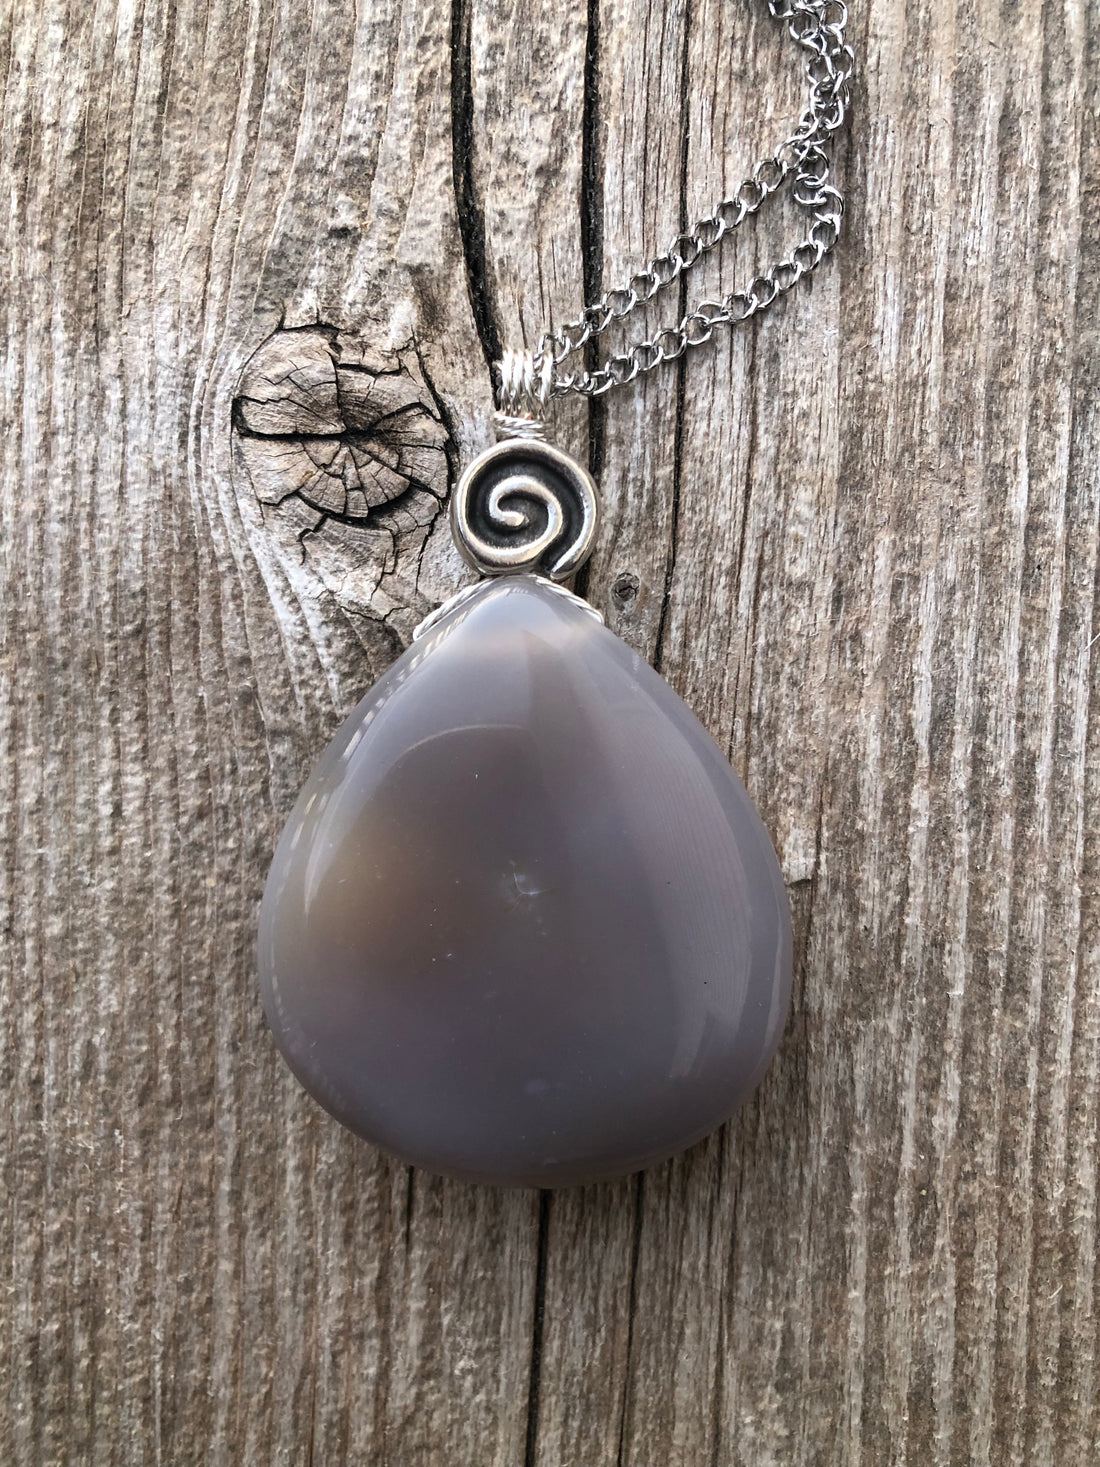 Druzy Agate Necklace for Grounding, Balance and Harmony. Swirl to Signify Consciousness. 20 inch Chain Included.